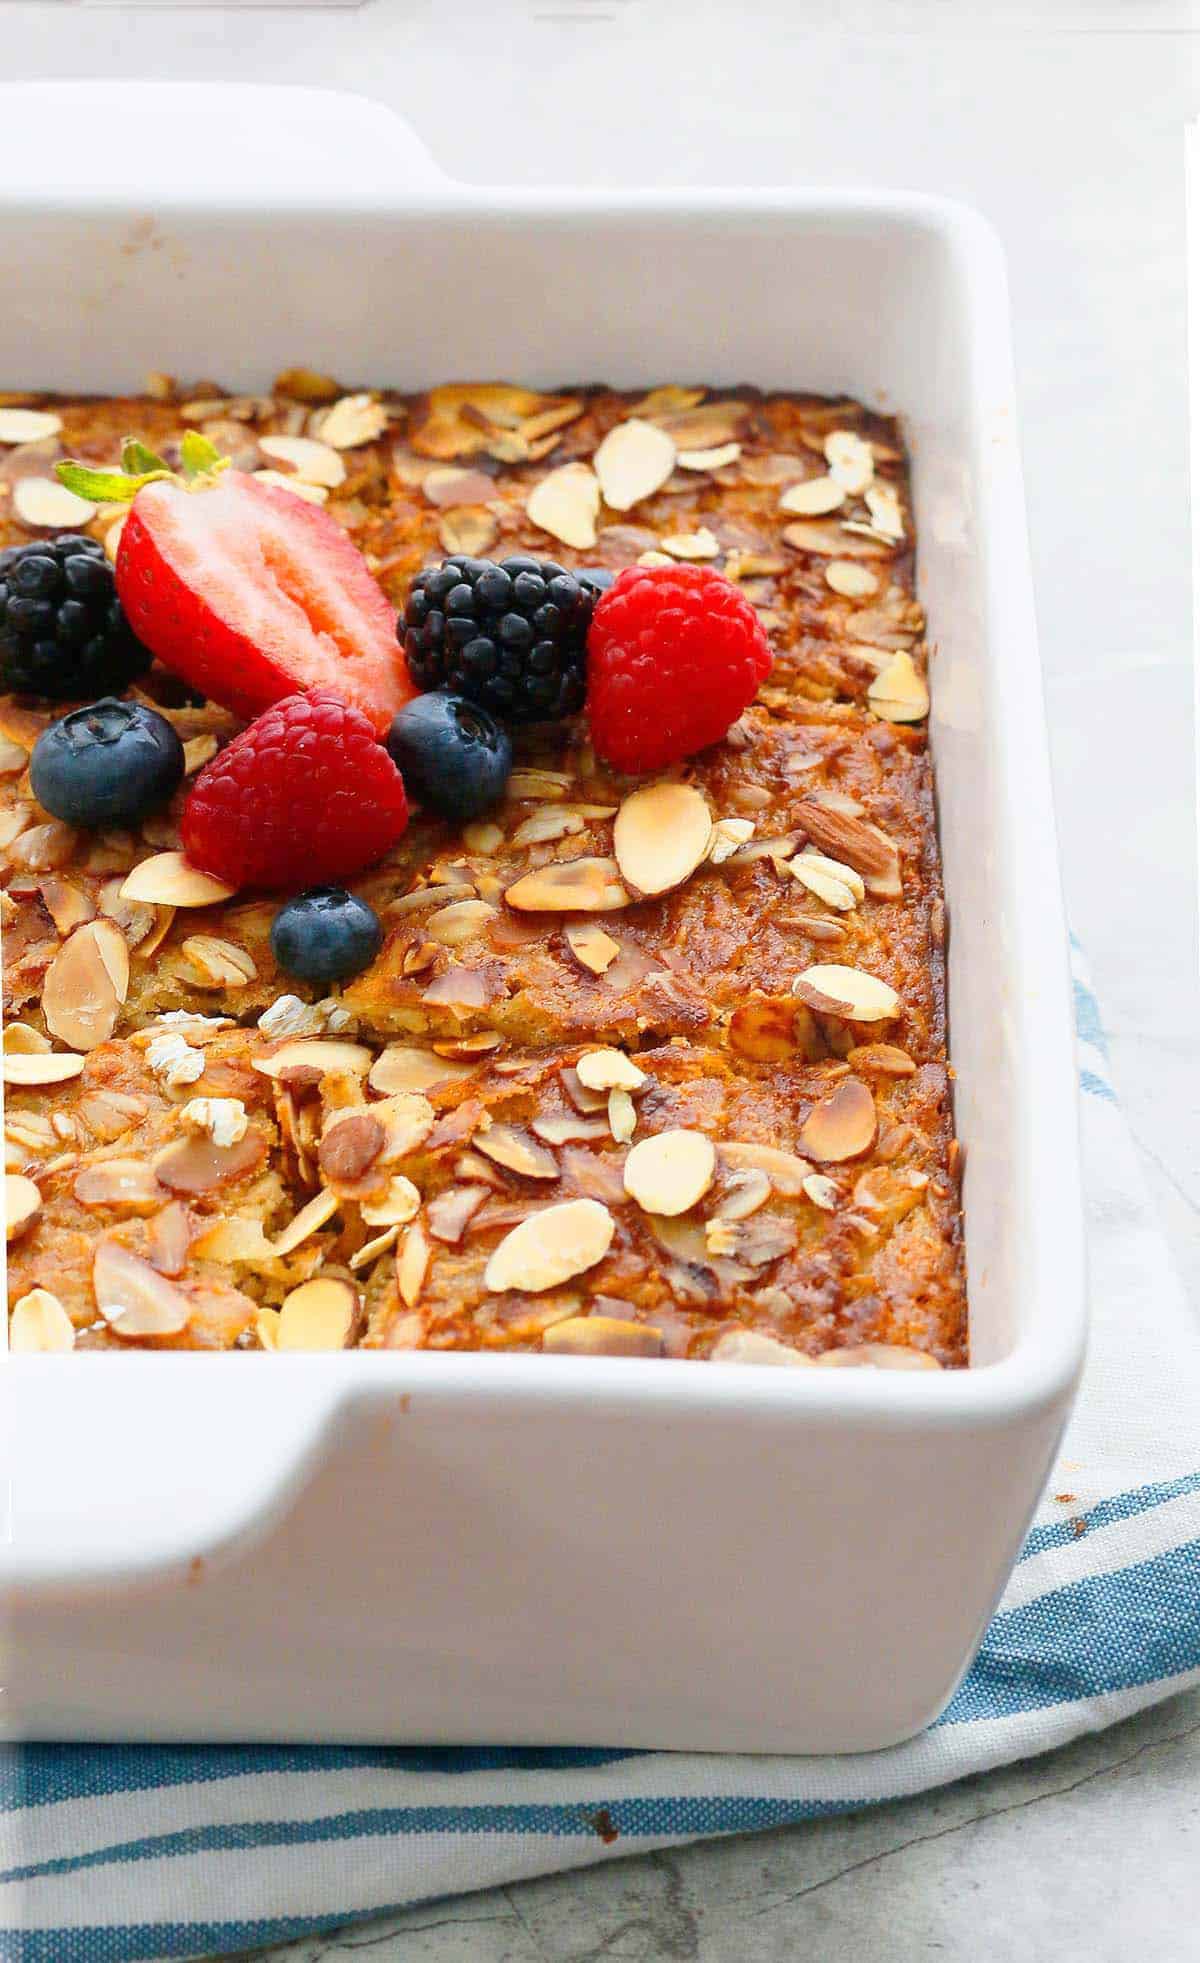 baked oatmeal topped with berries in a white baking pan.